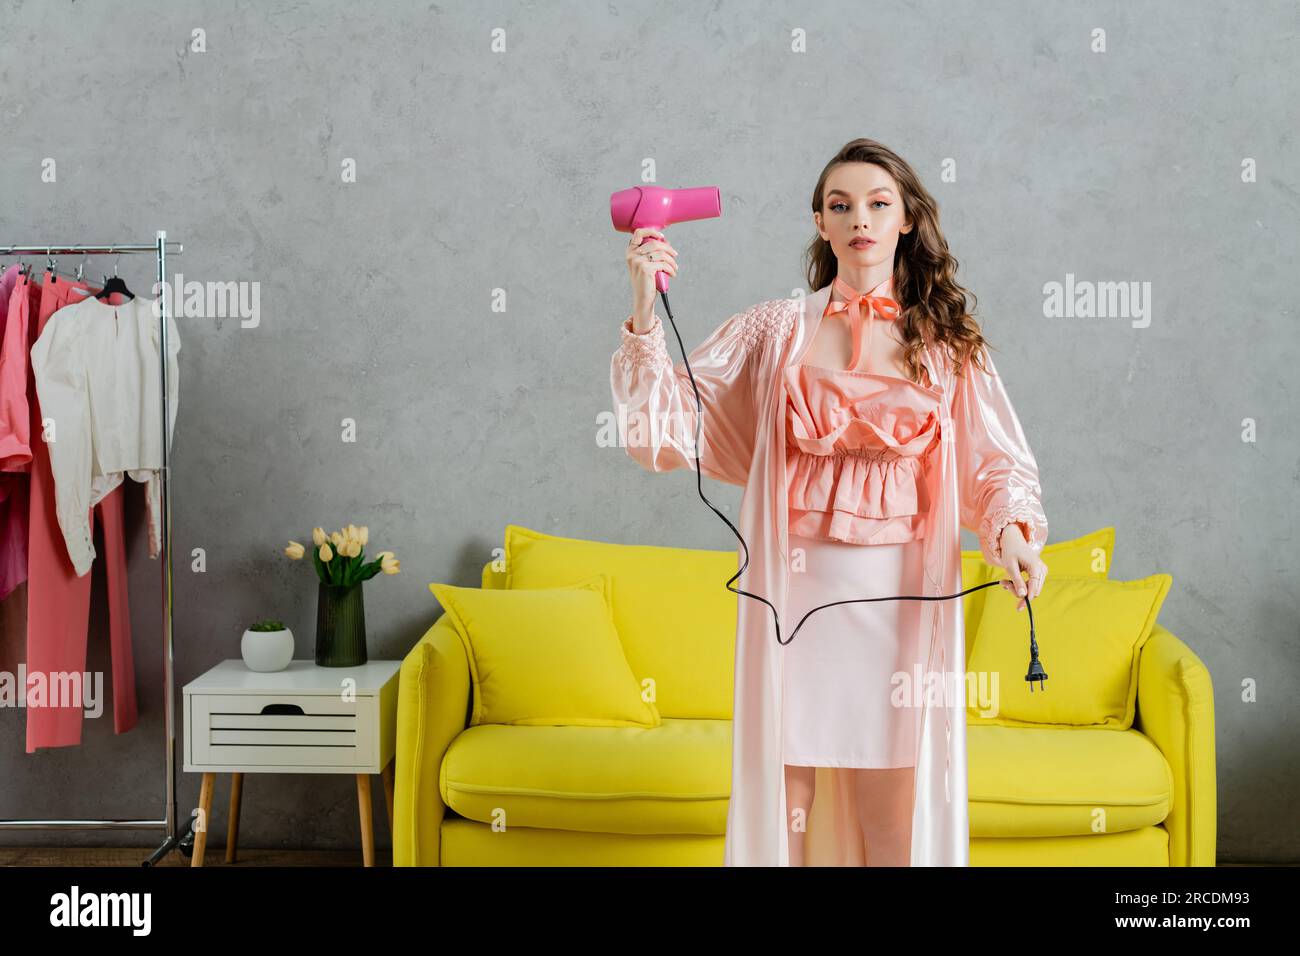 concept photography, woman acting like a doll, domestic life, housewife in pink silk robe holding hair dryer and plug, standing near yellow coach in m Stock Photo